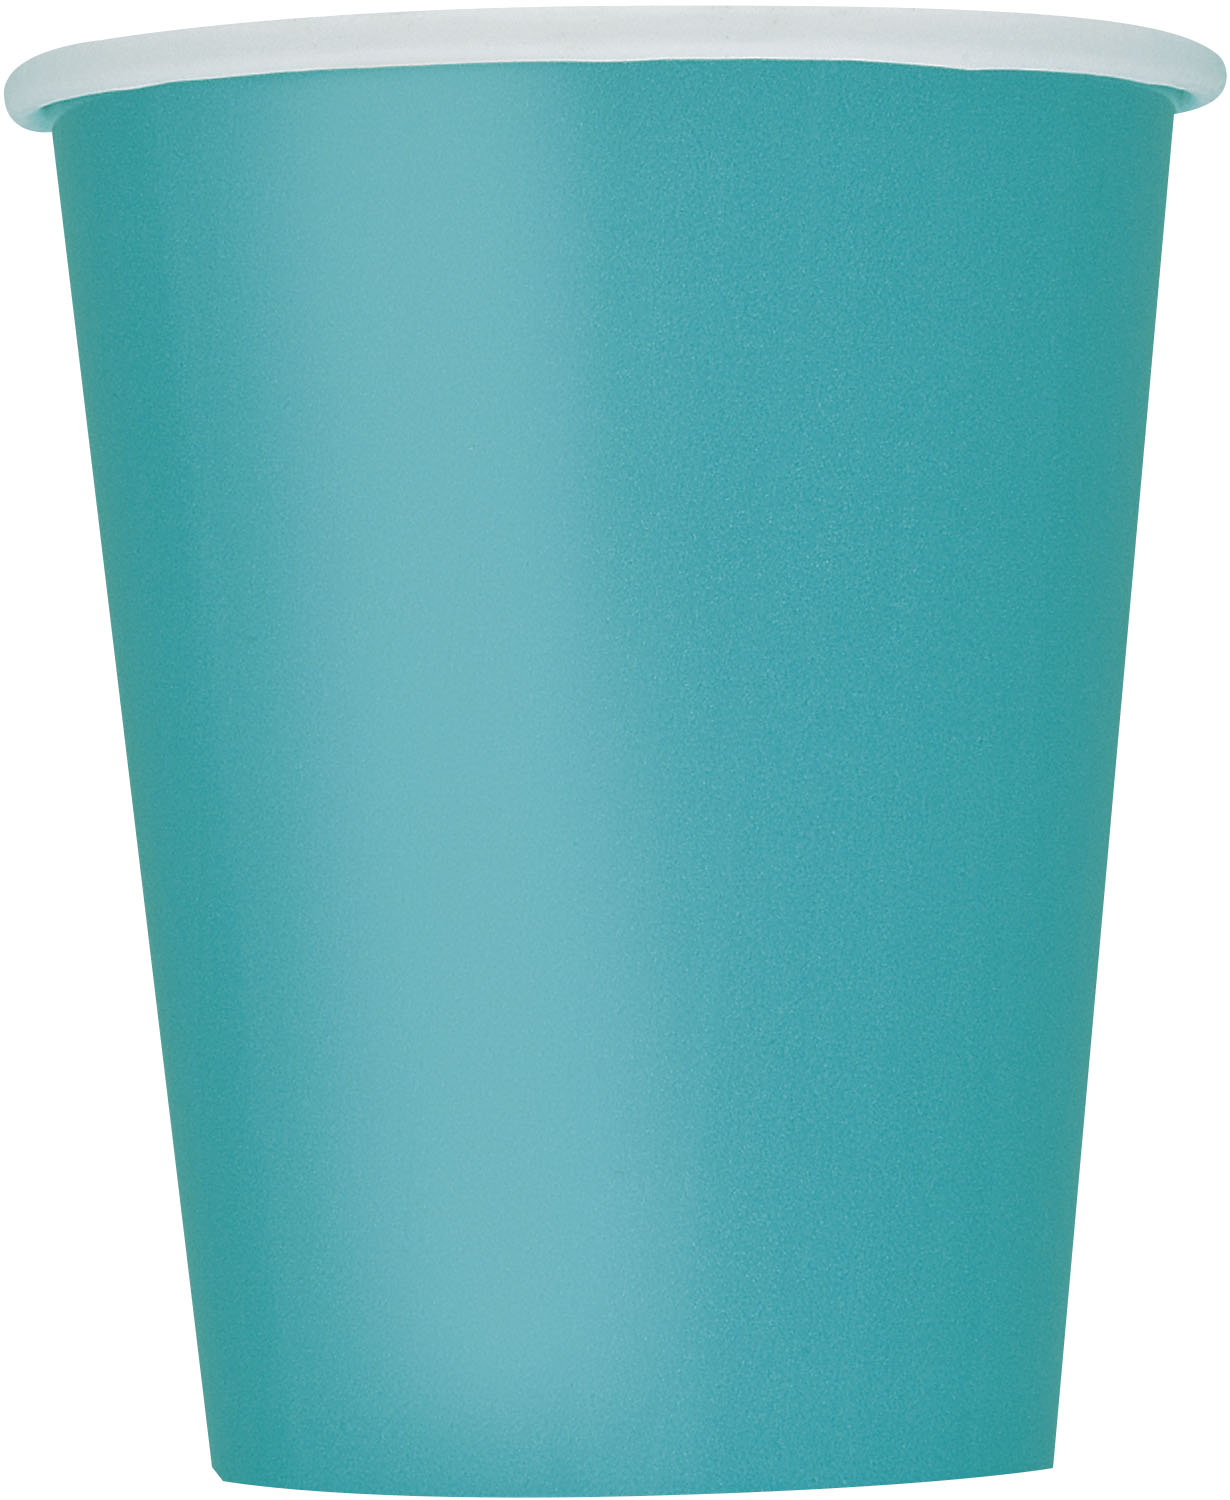 Turquoise Teal Cups 266ml (each)